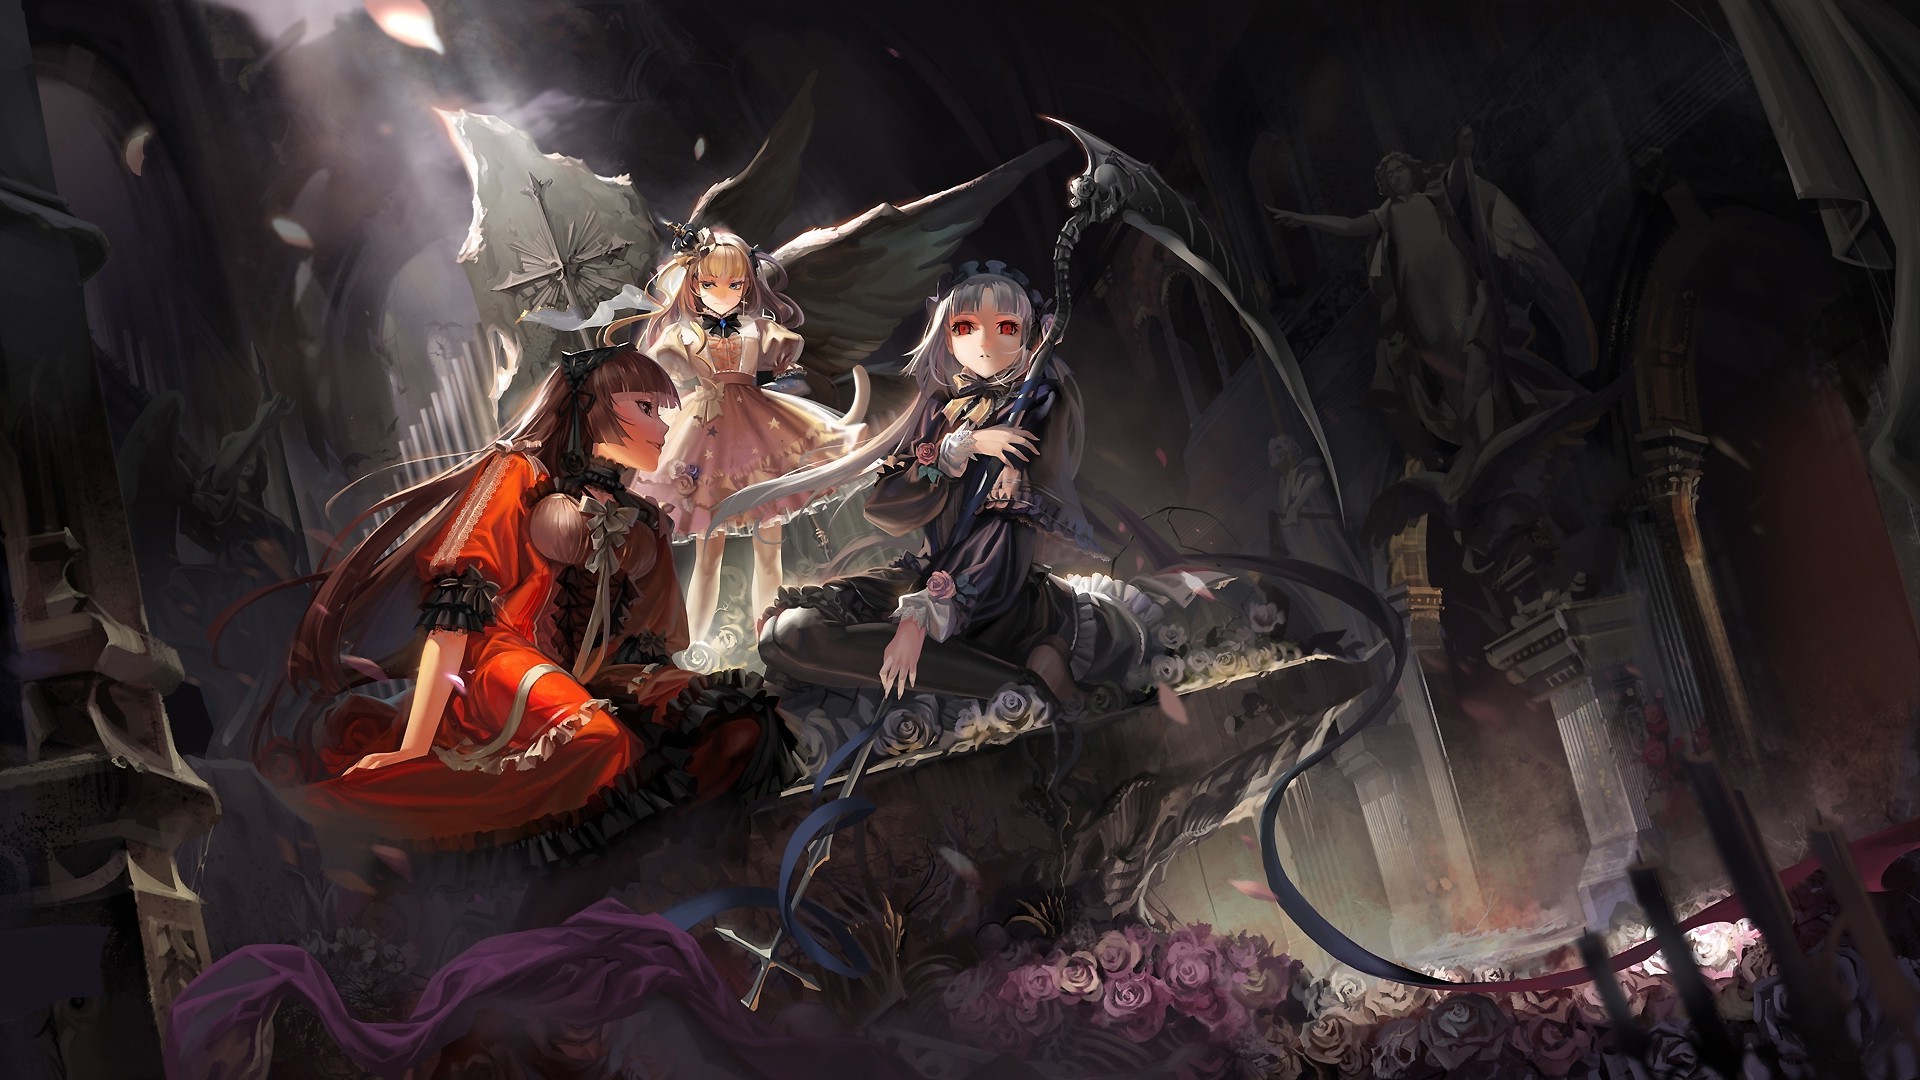 1920x1080 ... Image HD Gothic Anime Wallpapers - wallpaper.wiki ...